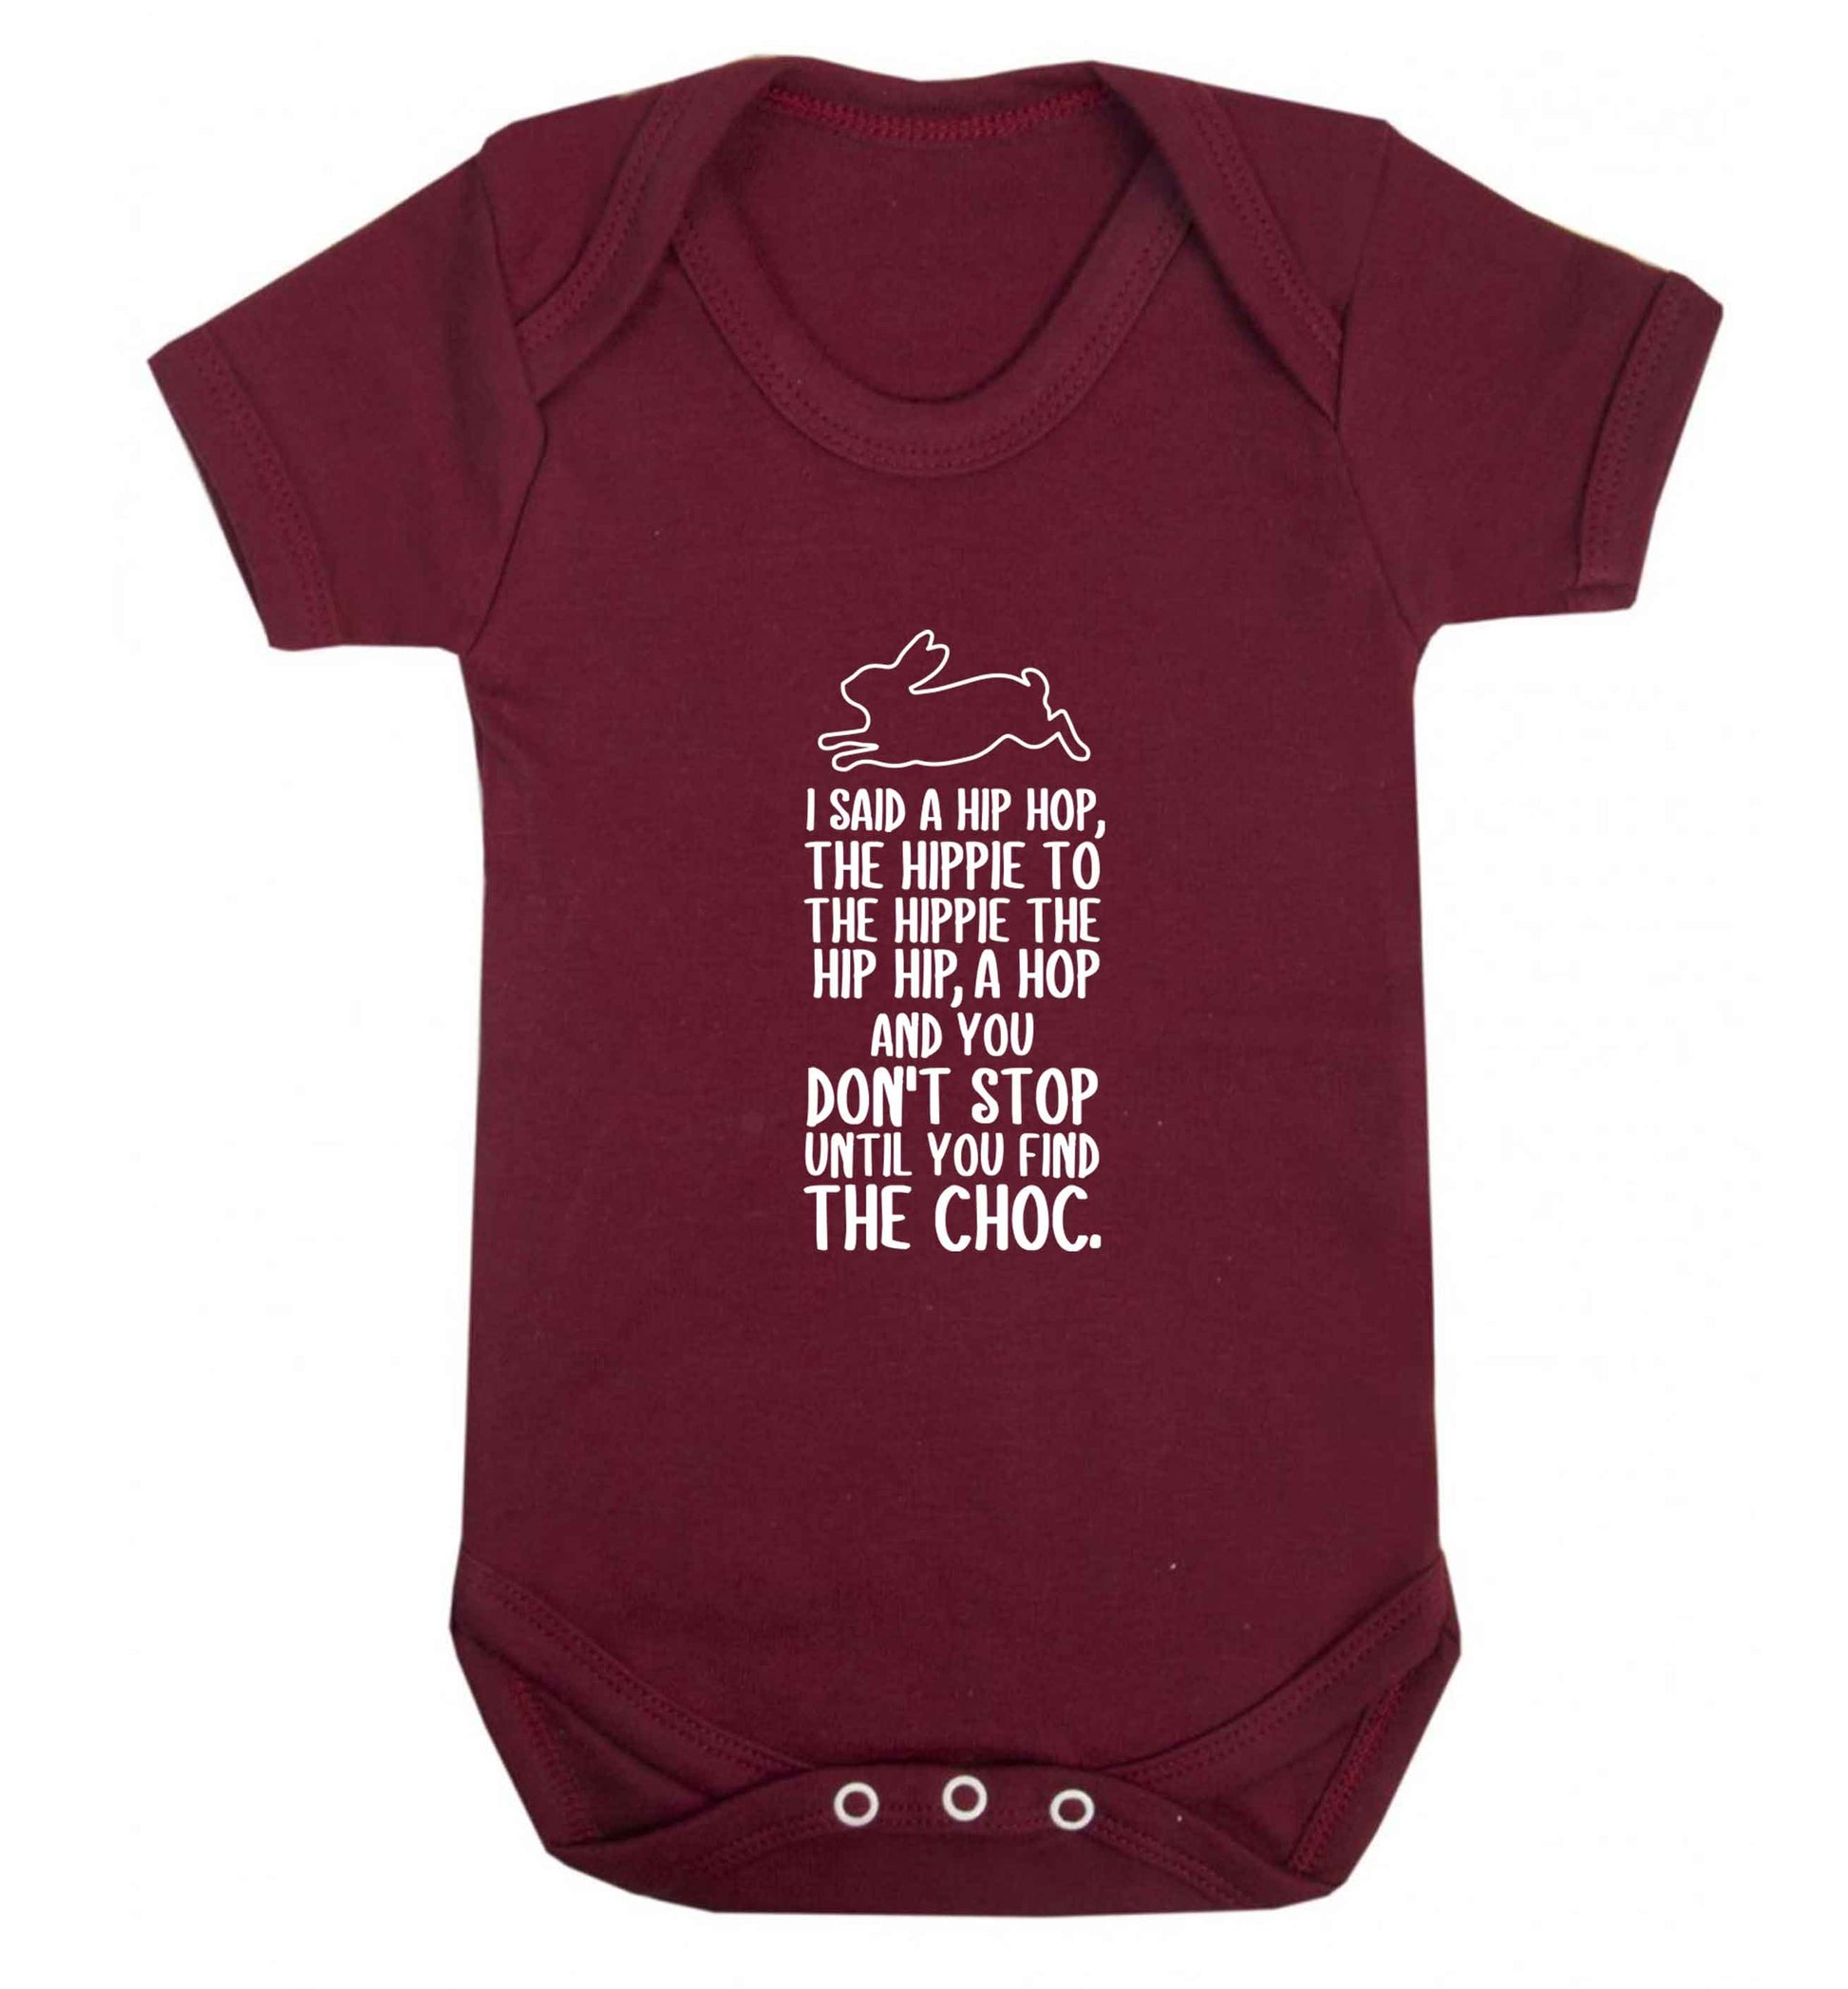 Don't stop until you find the choc baby vest maroon 18-24 months